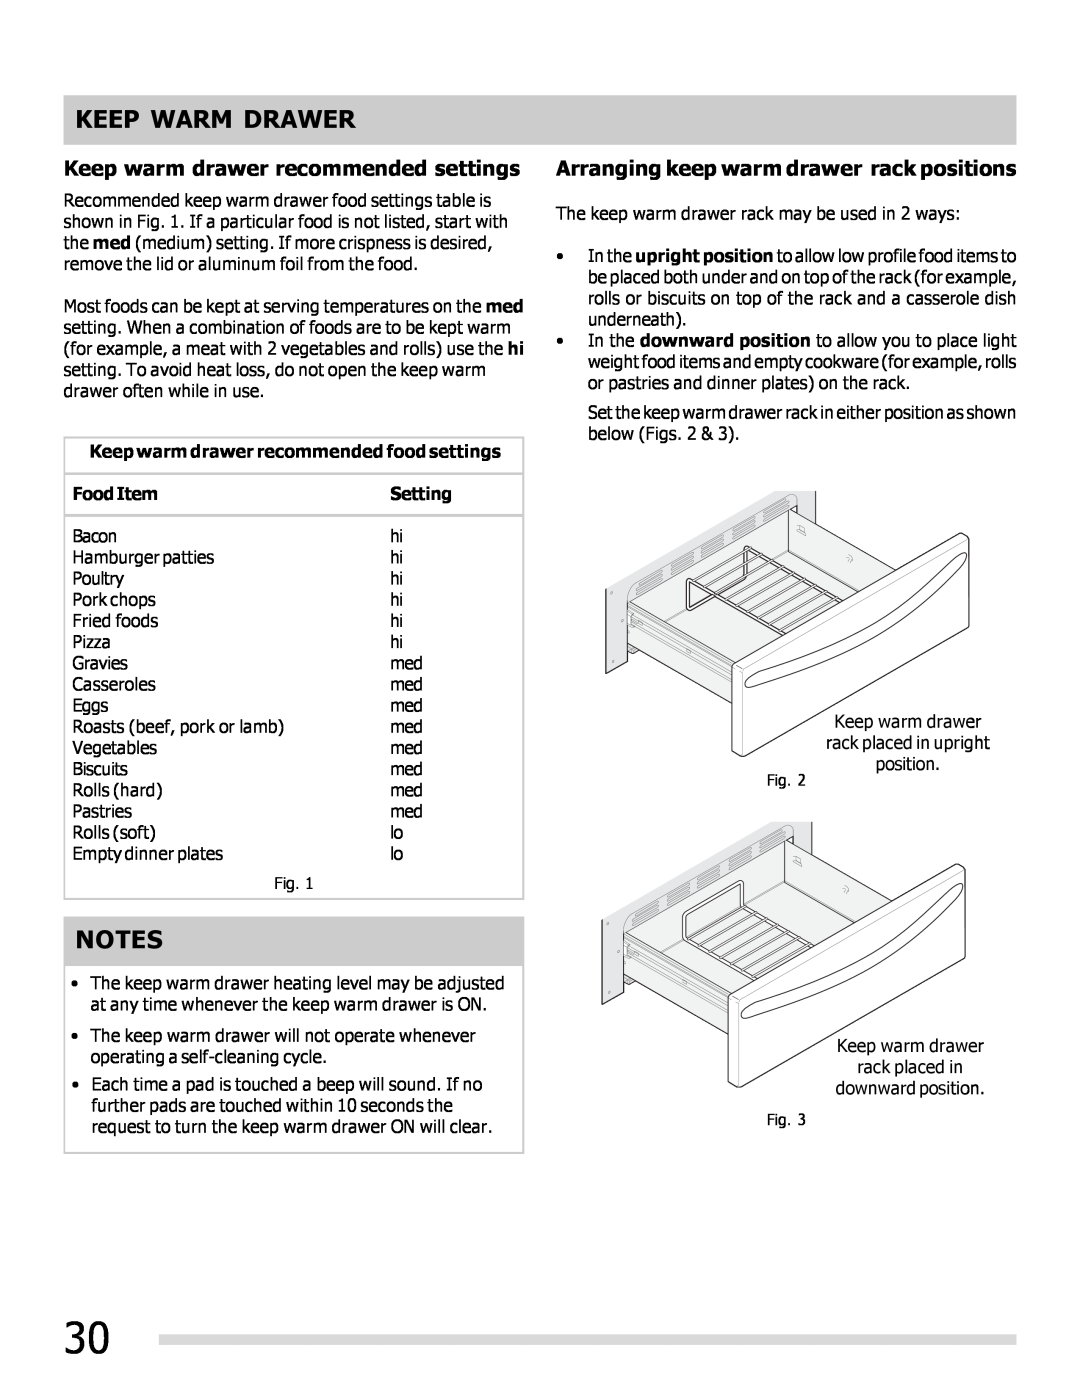 Frigidaire 316902202 Keep warm drawer recommended settings, Arranging keep warm drawer rack positions, Keep Warm Drawer 